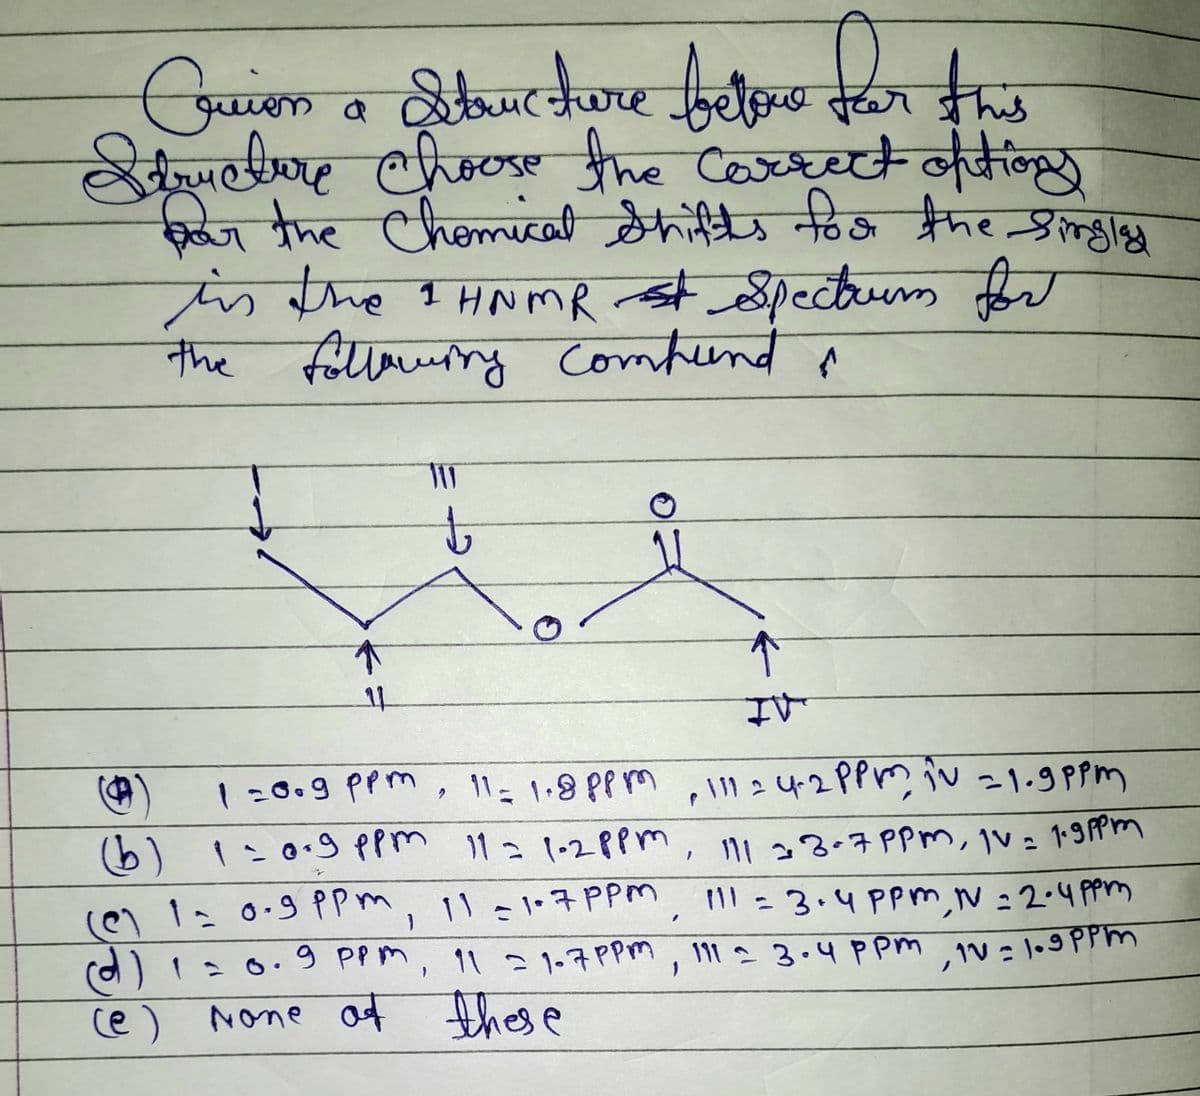 Cruien a Structure betone for this
Structure choose the correct options
for the Chemical Shifts for the singlad
is the 1 HNMR st Spectrum for
the following compund &
10
↑
11
IV
1=0.9 ppm, 11 = 1.8 ppm - 11124-2ppm in -1.9 ppm
2
(b) 1 = 0.9 ppm 11 = 1-2ppm
1
(@) 1 = 0.9 ppm, 11 =1.7 ppm
(d) 1 = 0.9 ppm,
11 =1.7 PPM
(e) None of these
111 33-7 PPM, Iv= 1.9 ppm
11 =1.7 PPM 111 = 3.4 ppm, N=2.4ppm
111 3.4 ppm, 1V=1.9 ppm
=
↑
فسها